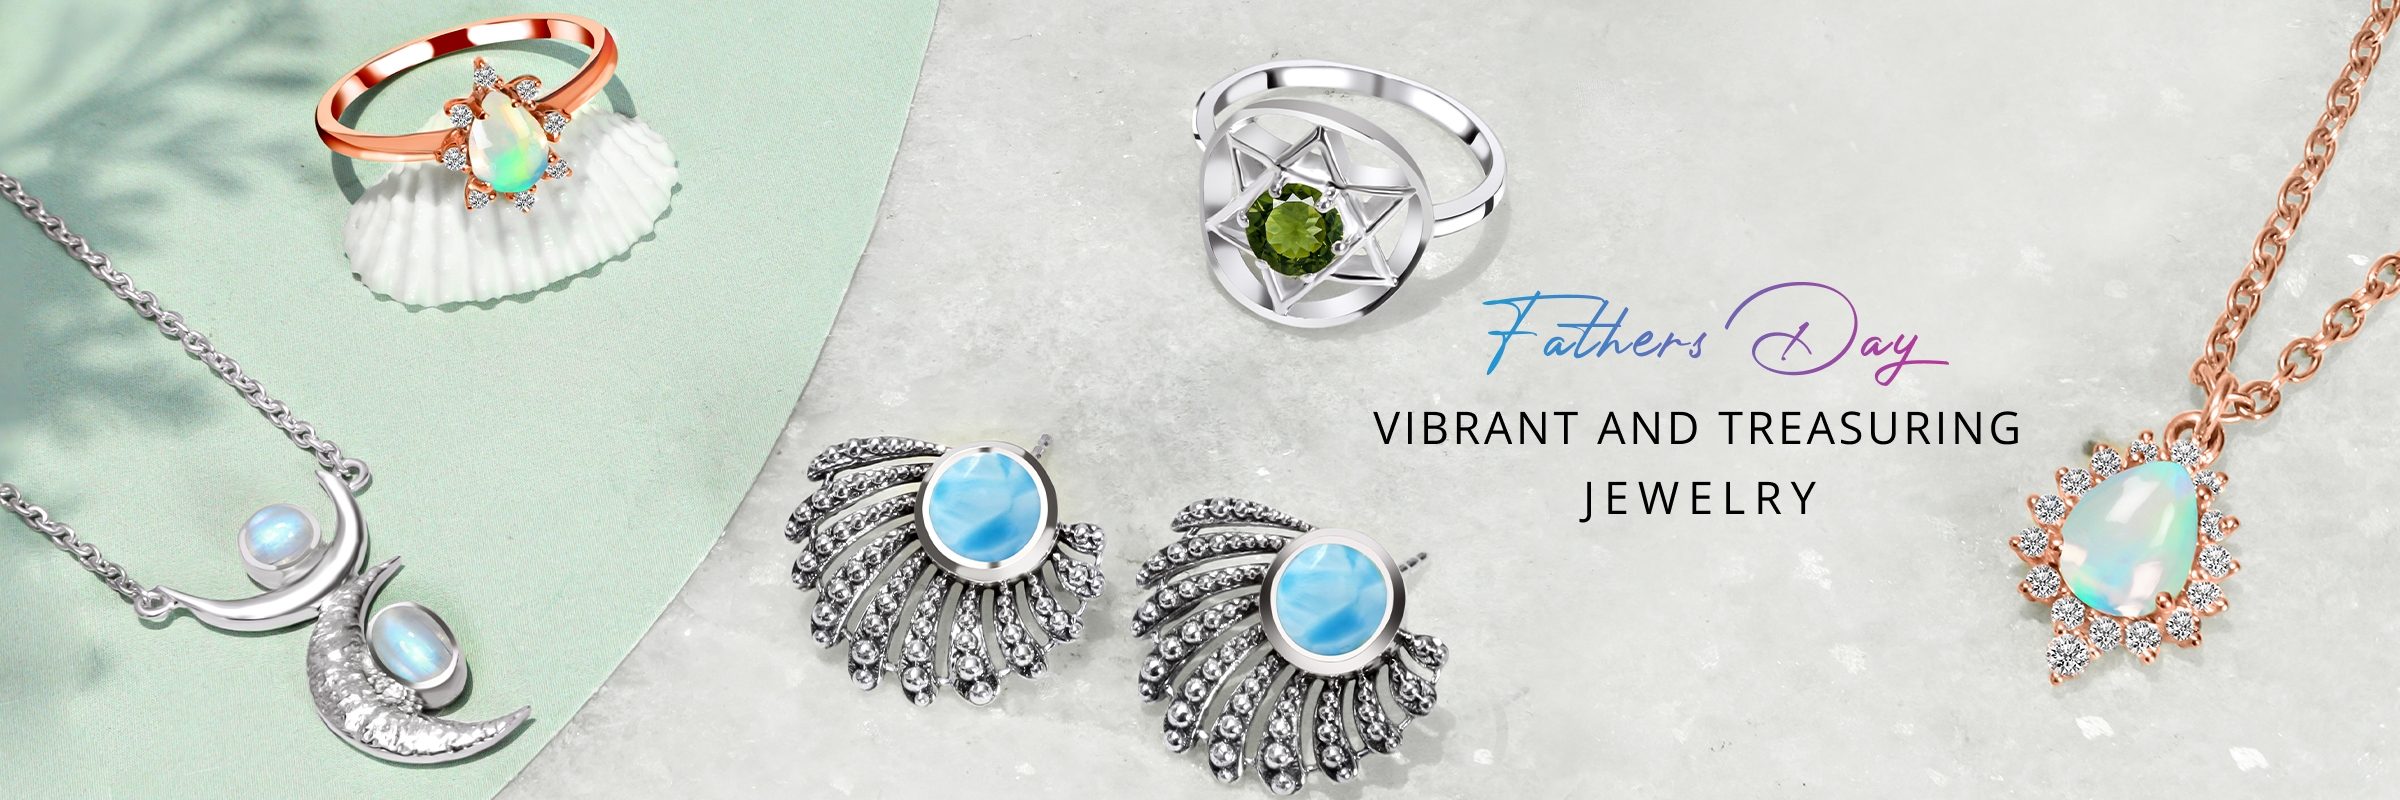 Fathers Day - Vibrant And Treasuring Jewelry 